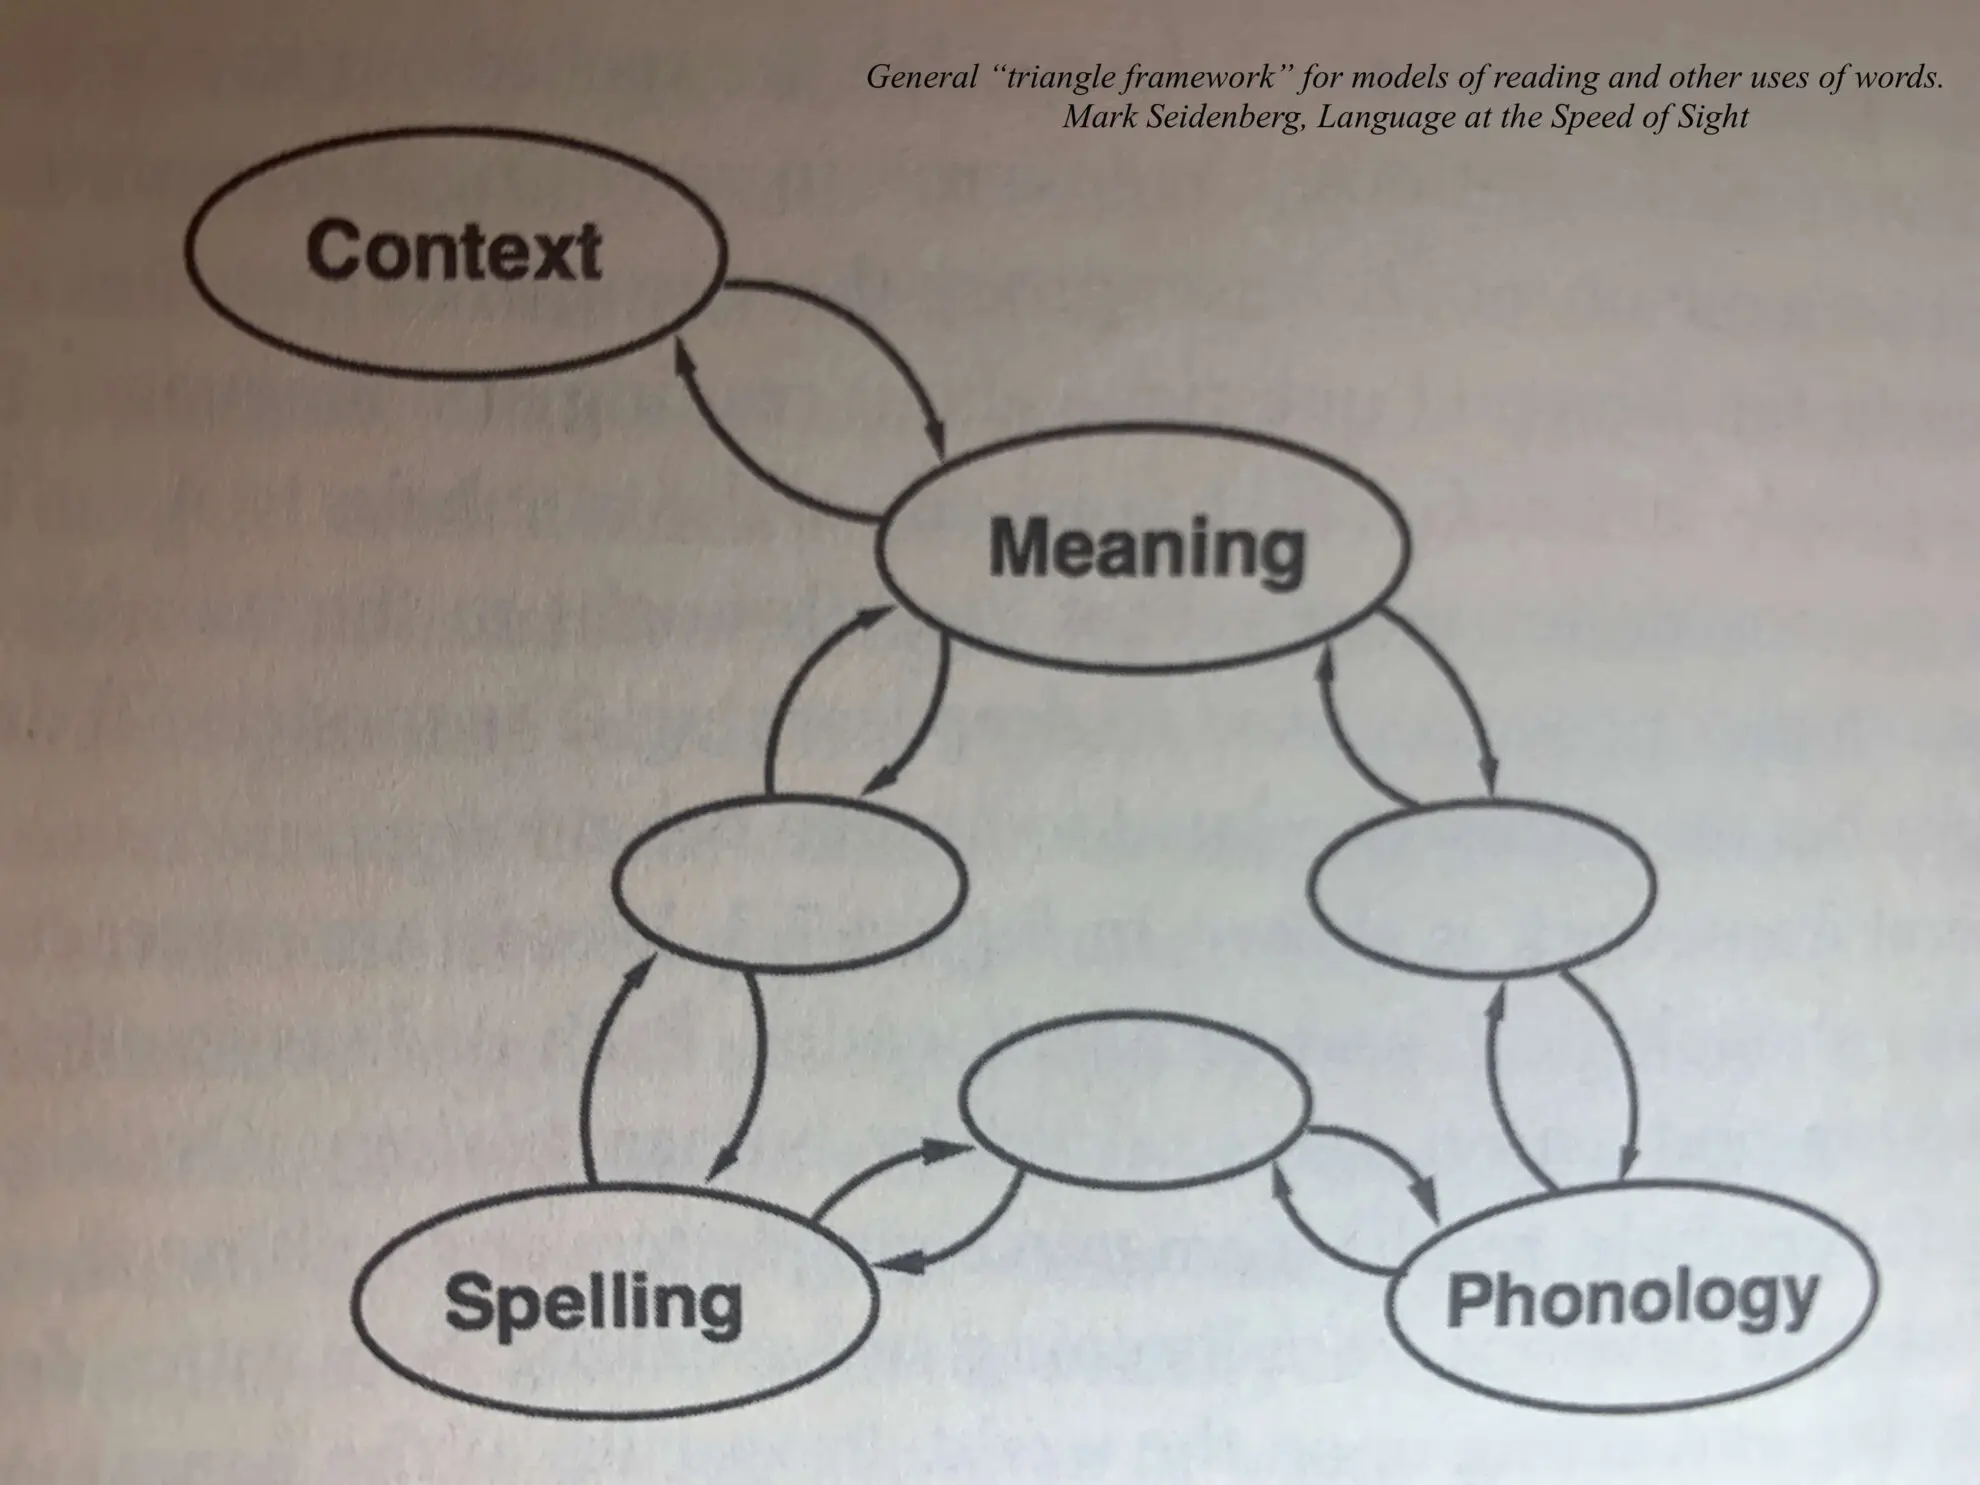 Seidenberg's triangle of word recognition